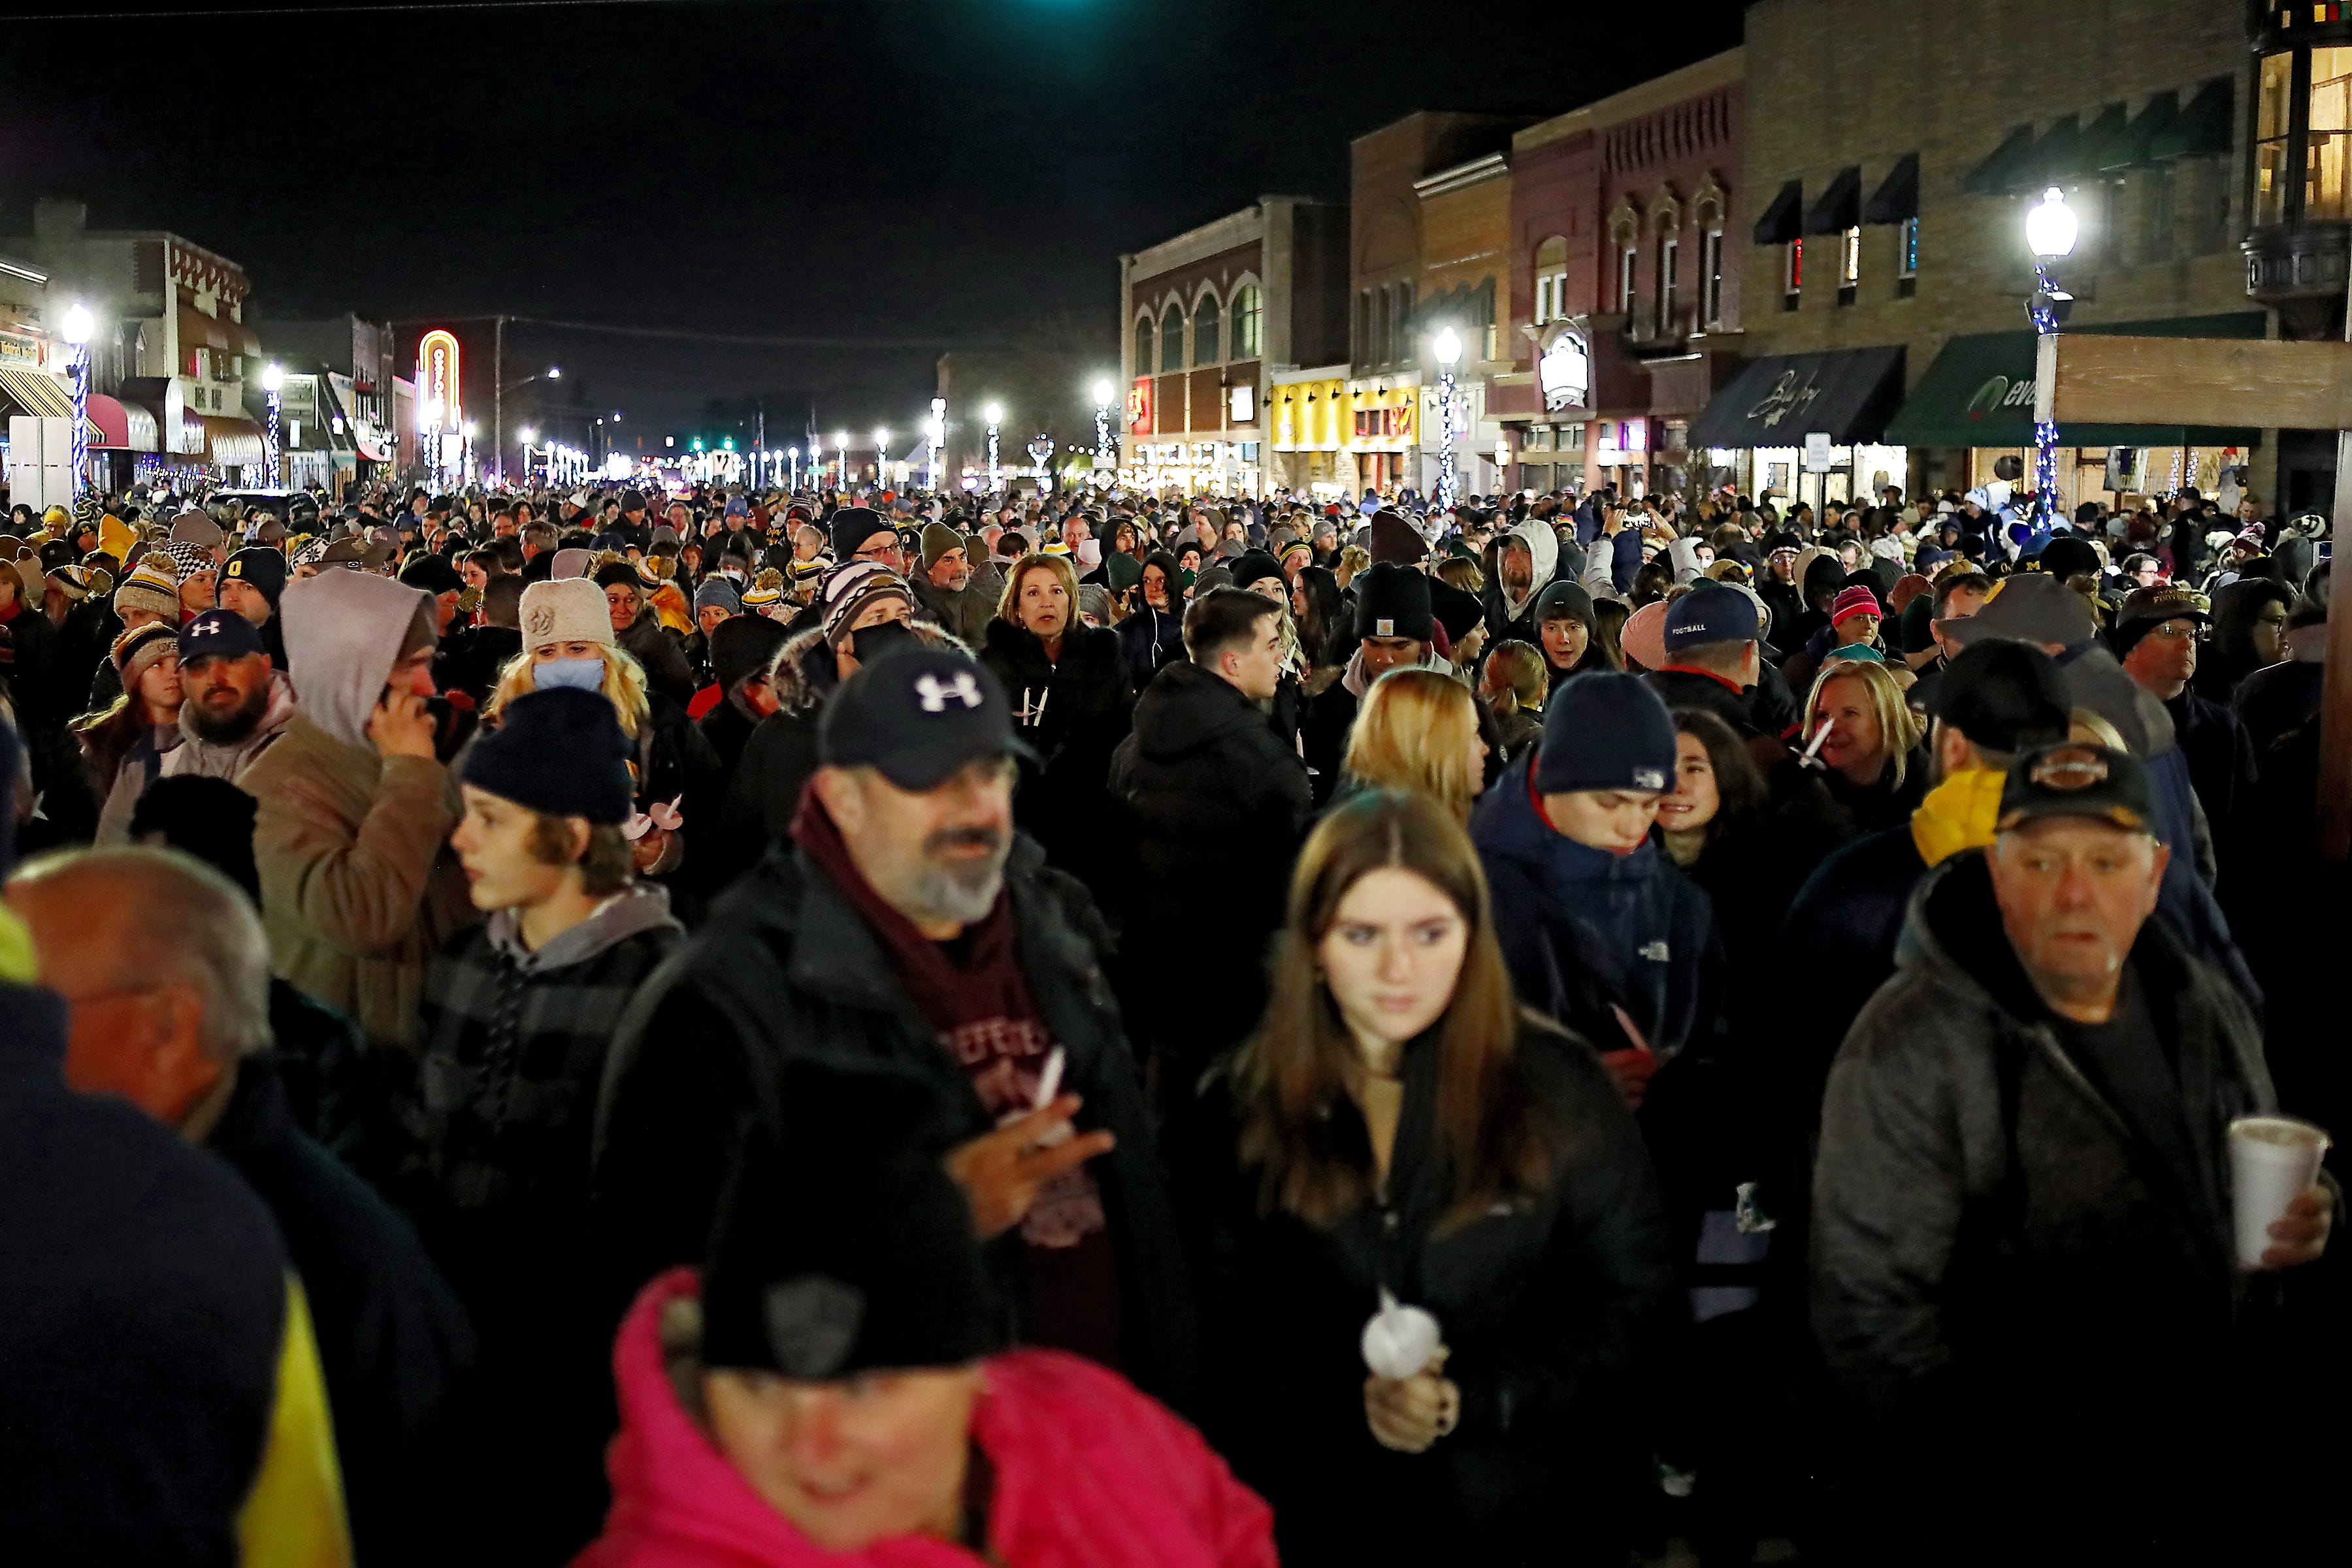 Thousands of people from around metro Detroit gather in downtown Oxford for a candlelight vigil on Friday, Dec. 3, 2021 in memory of the four Oxford High School students who died in a school shooting Tuesday.